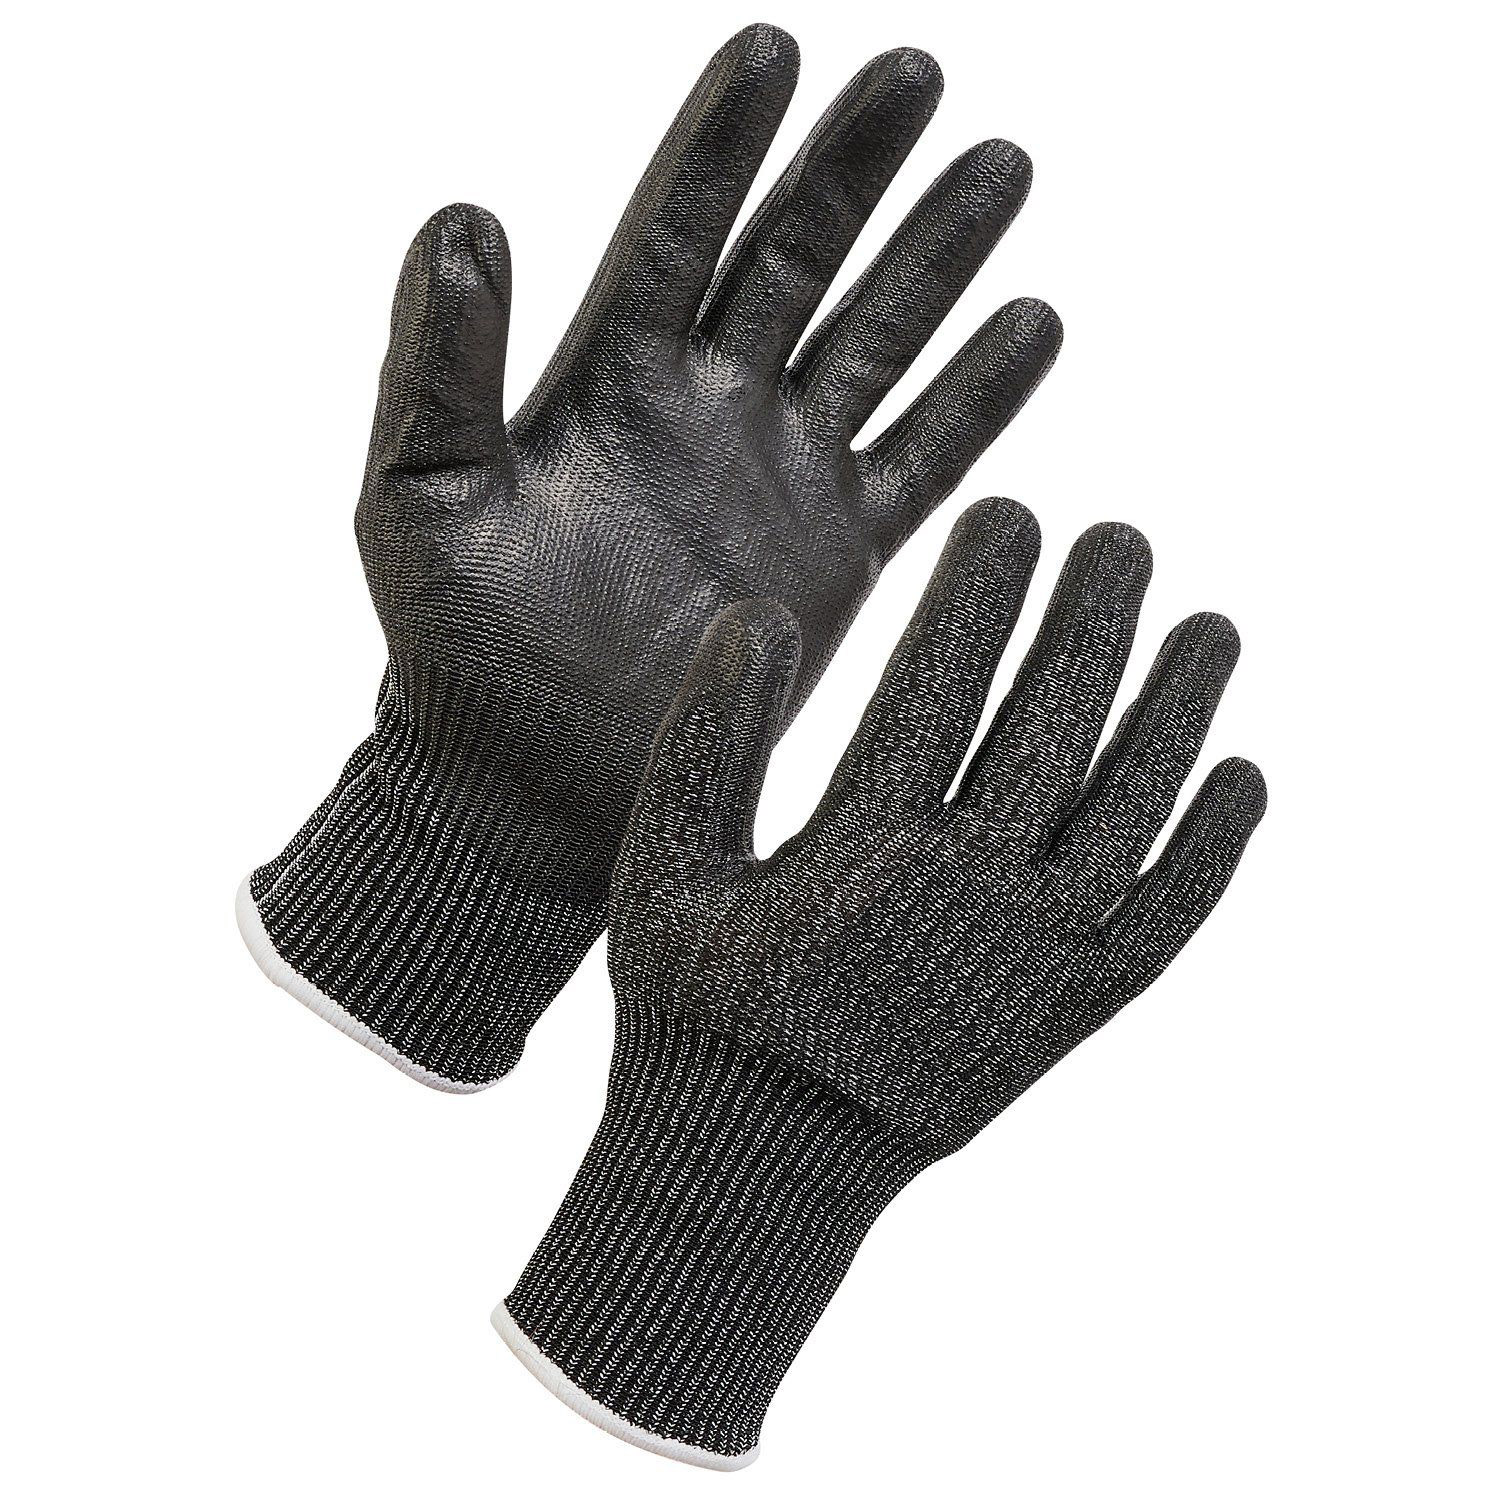 Level F Cut Resistant Gloves with PU Calm Coating